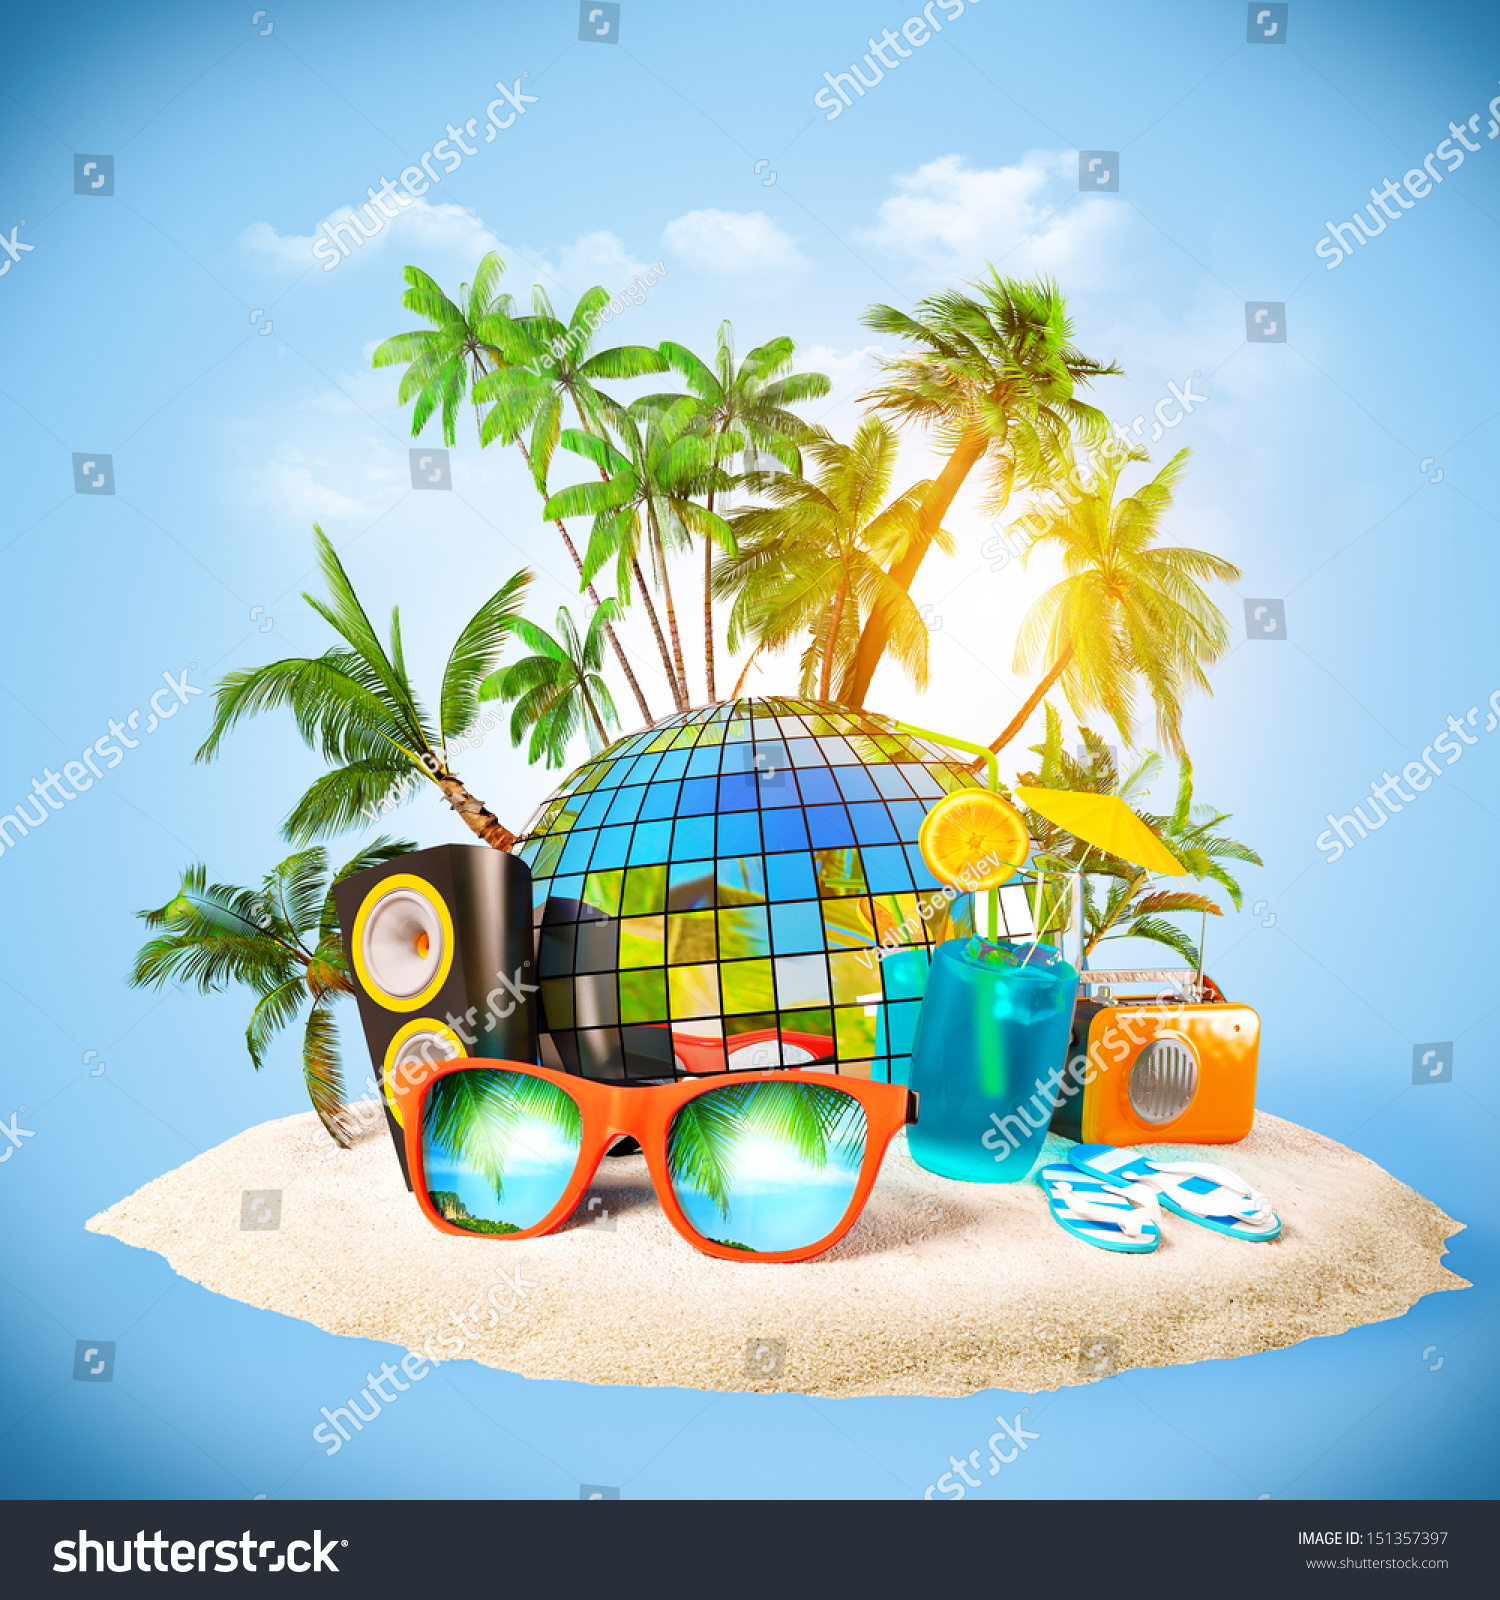 stock-photo-tropical-island-party-at-the-beach-traveling-vacation-151357397.jpg